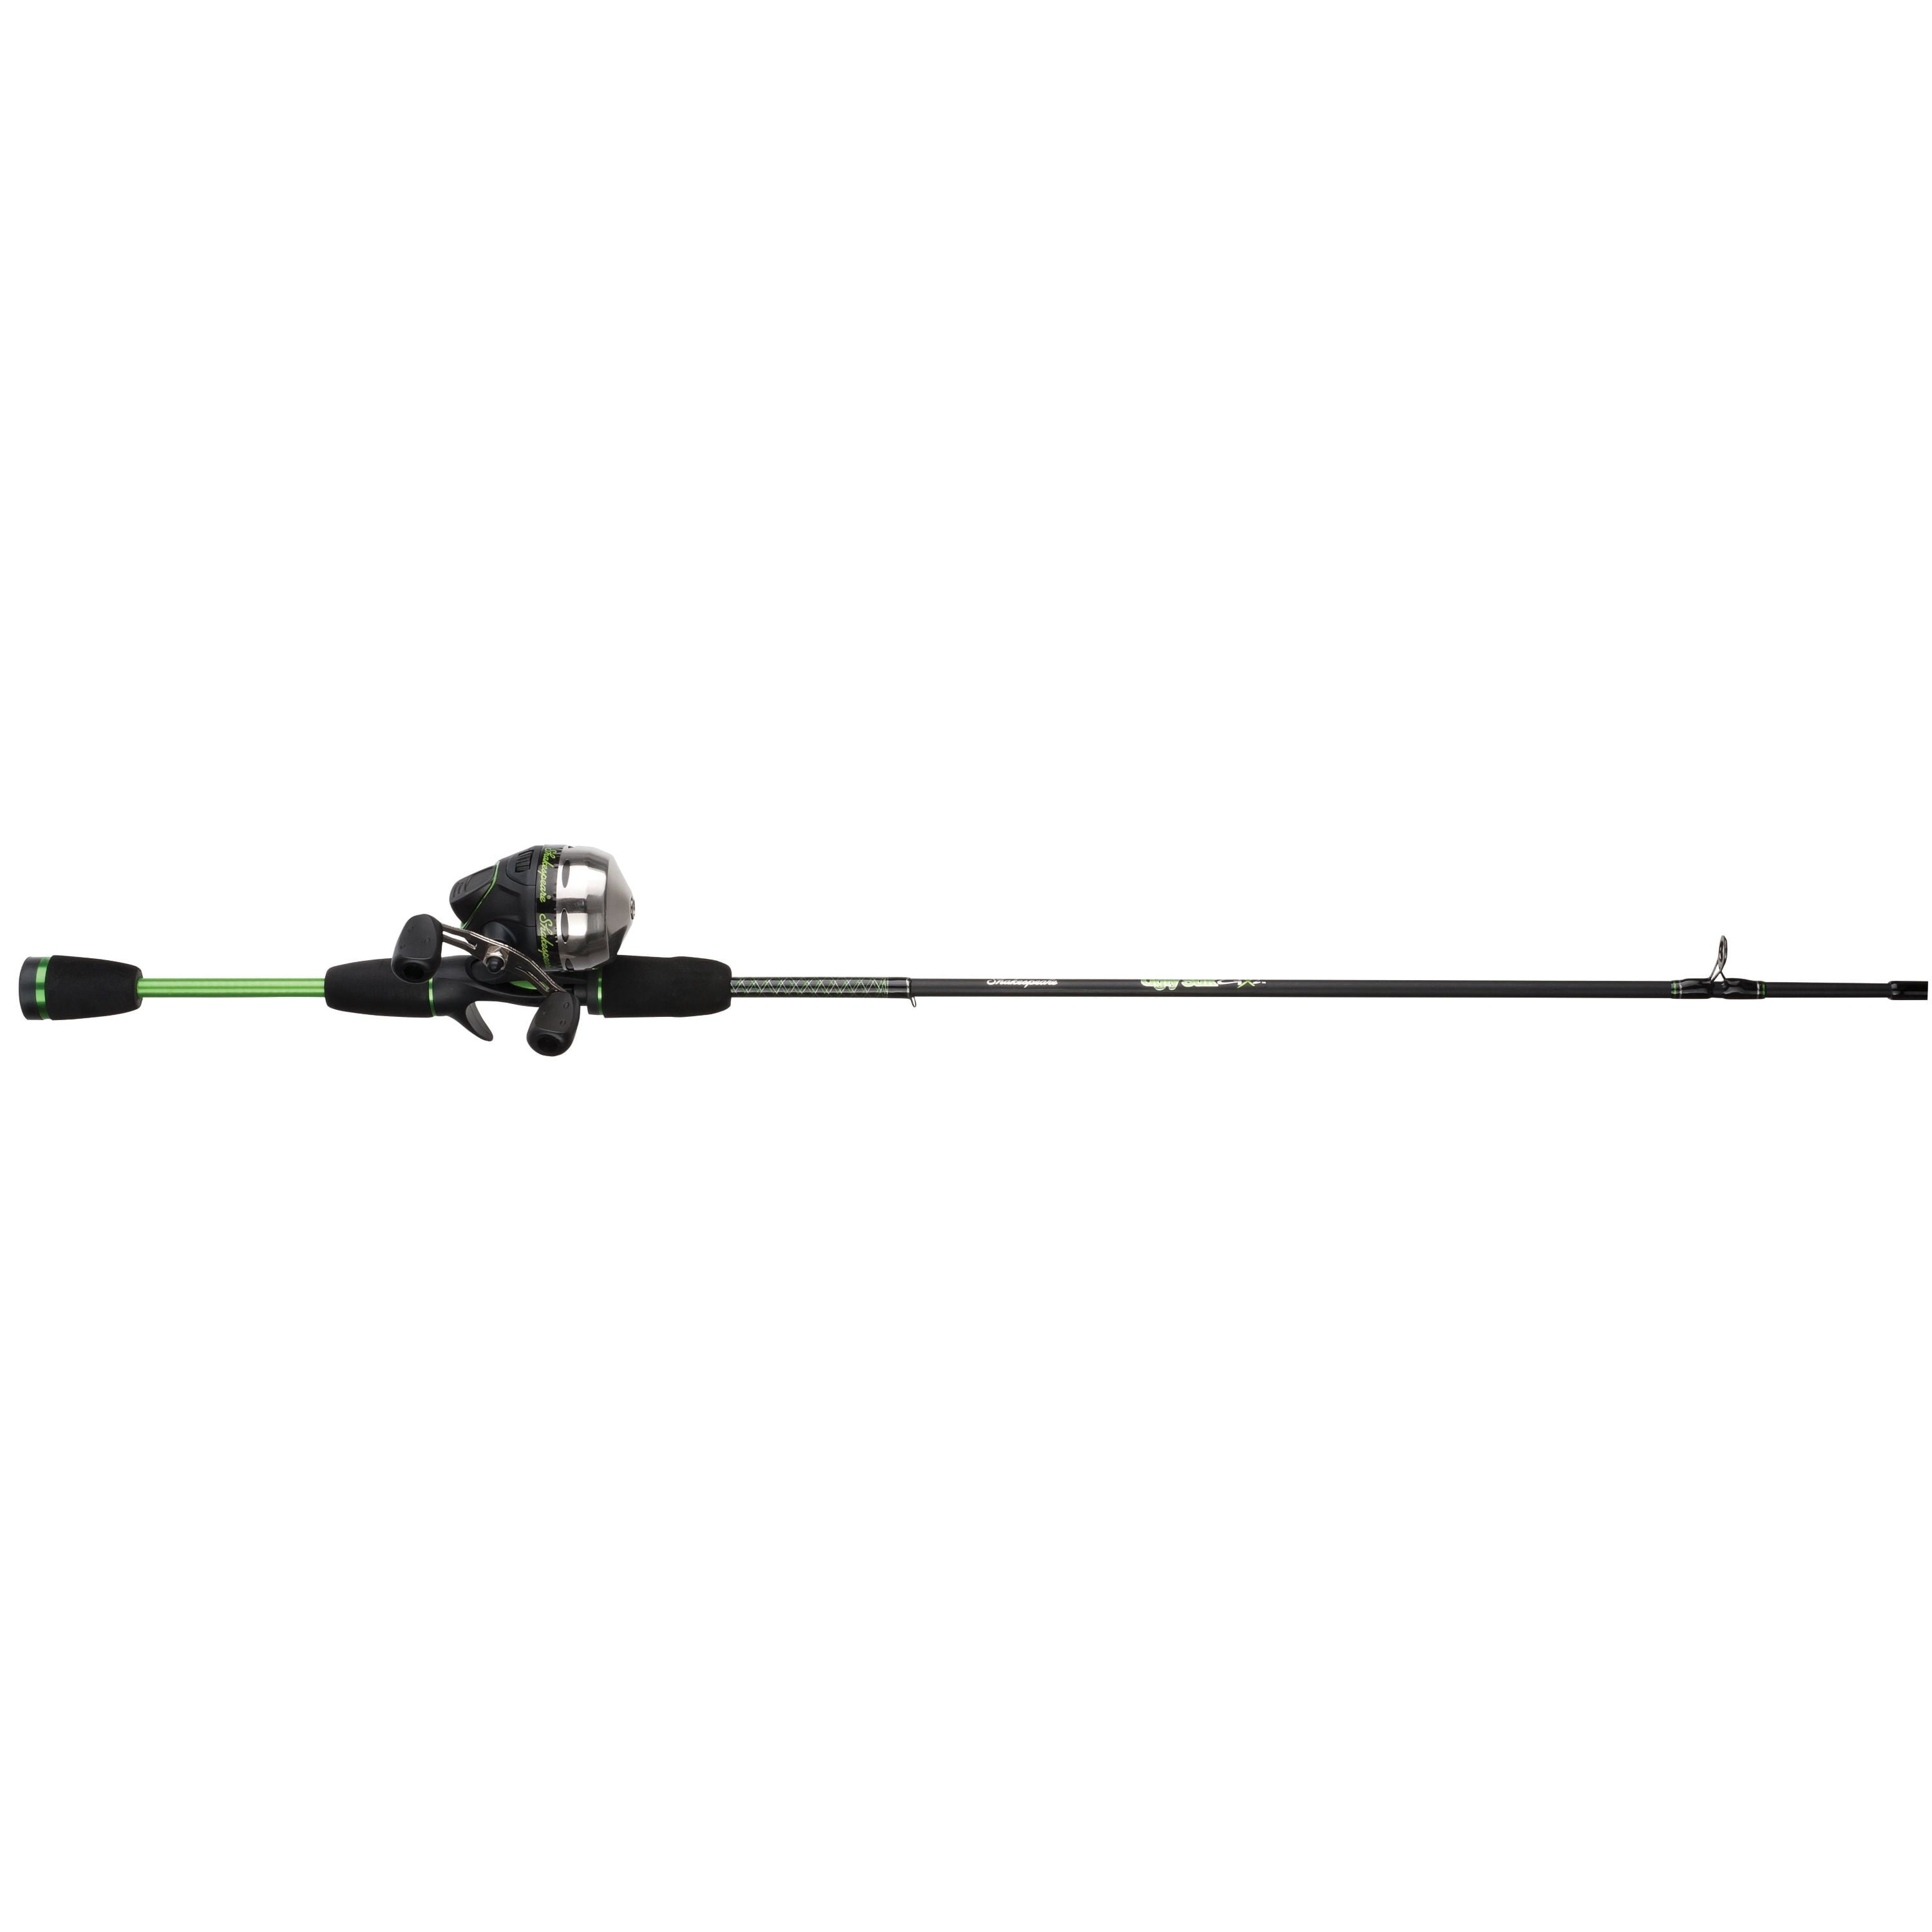 Ugly Stik 5'6” GX2 Spincast Youth Fishing Rod and Reel Spincast Combo 